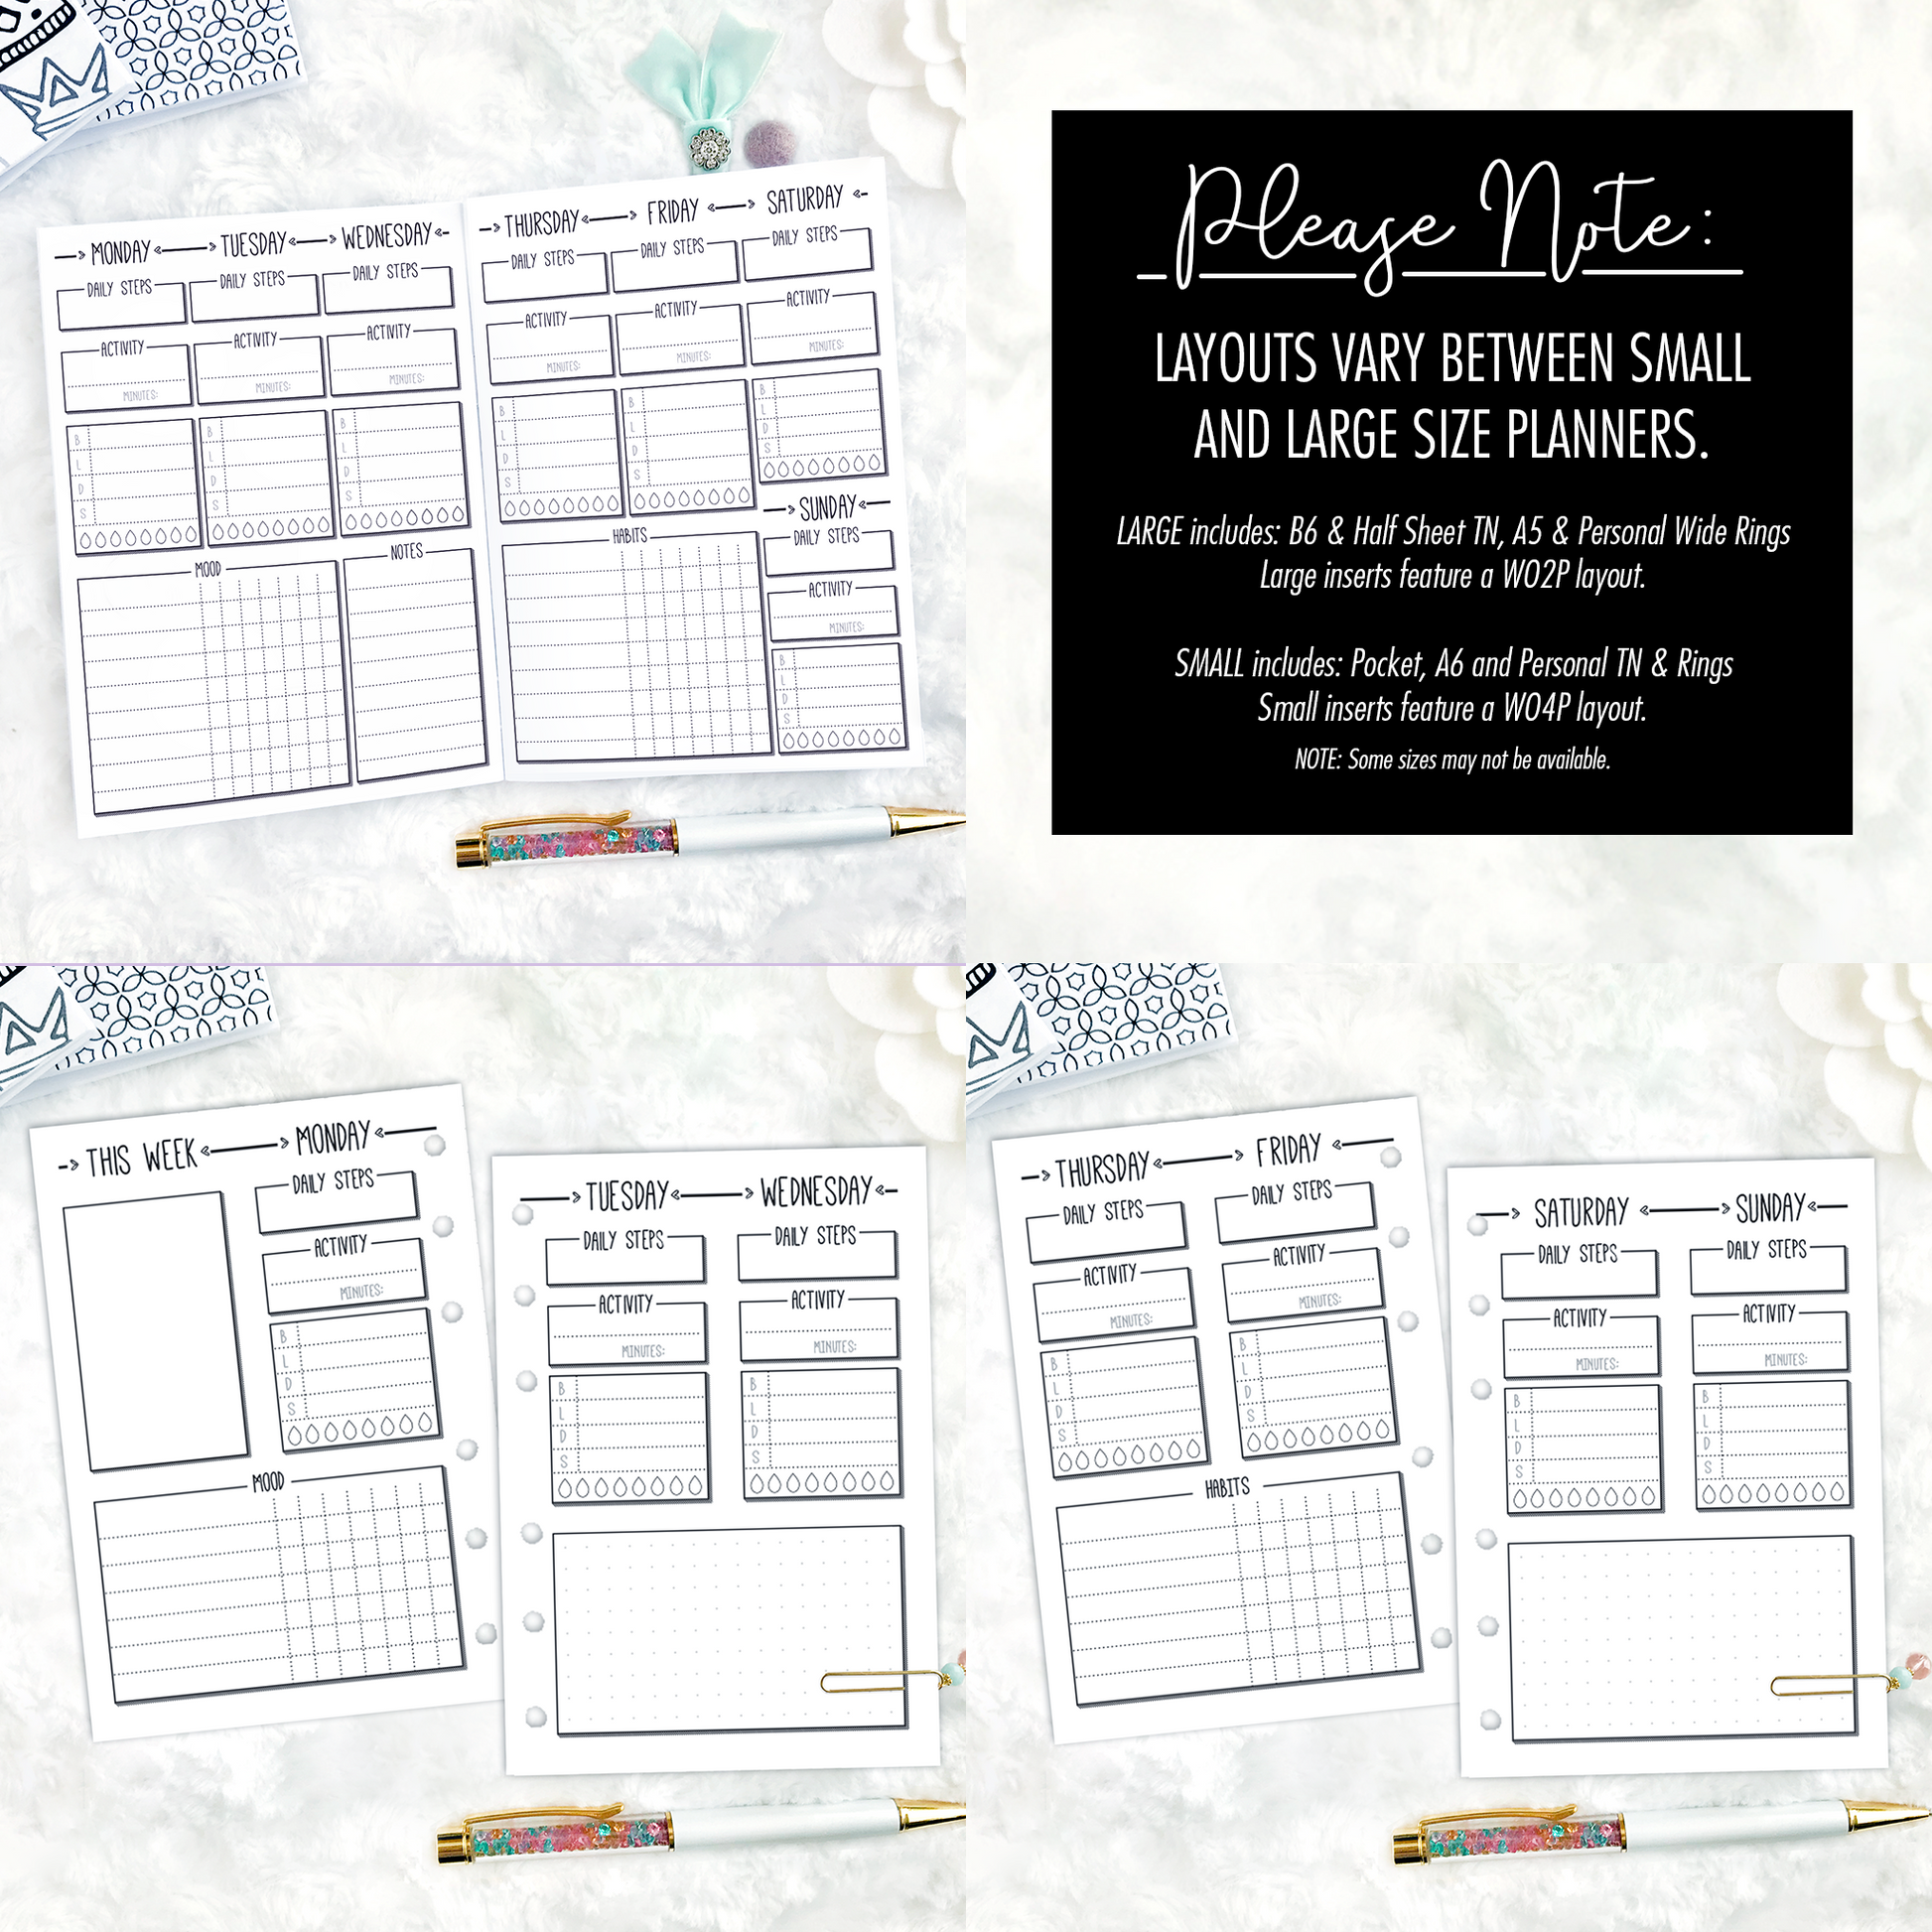 Printable Planner Template Weekly Spread Bullet Journal. Bullet Journal  Inserts. Printable Journal Pages 